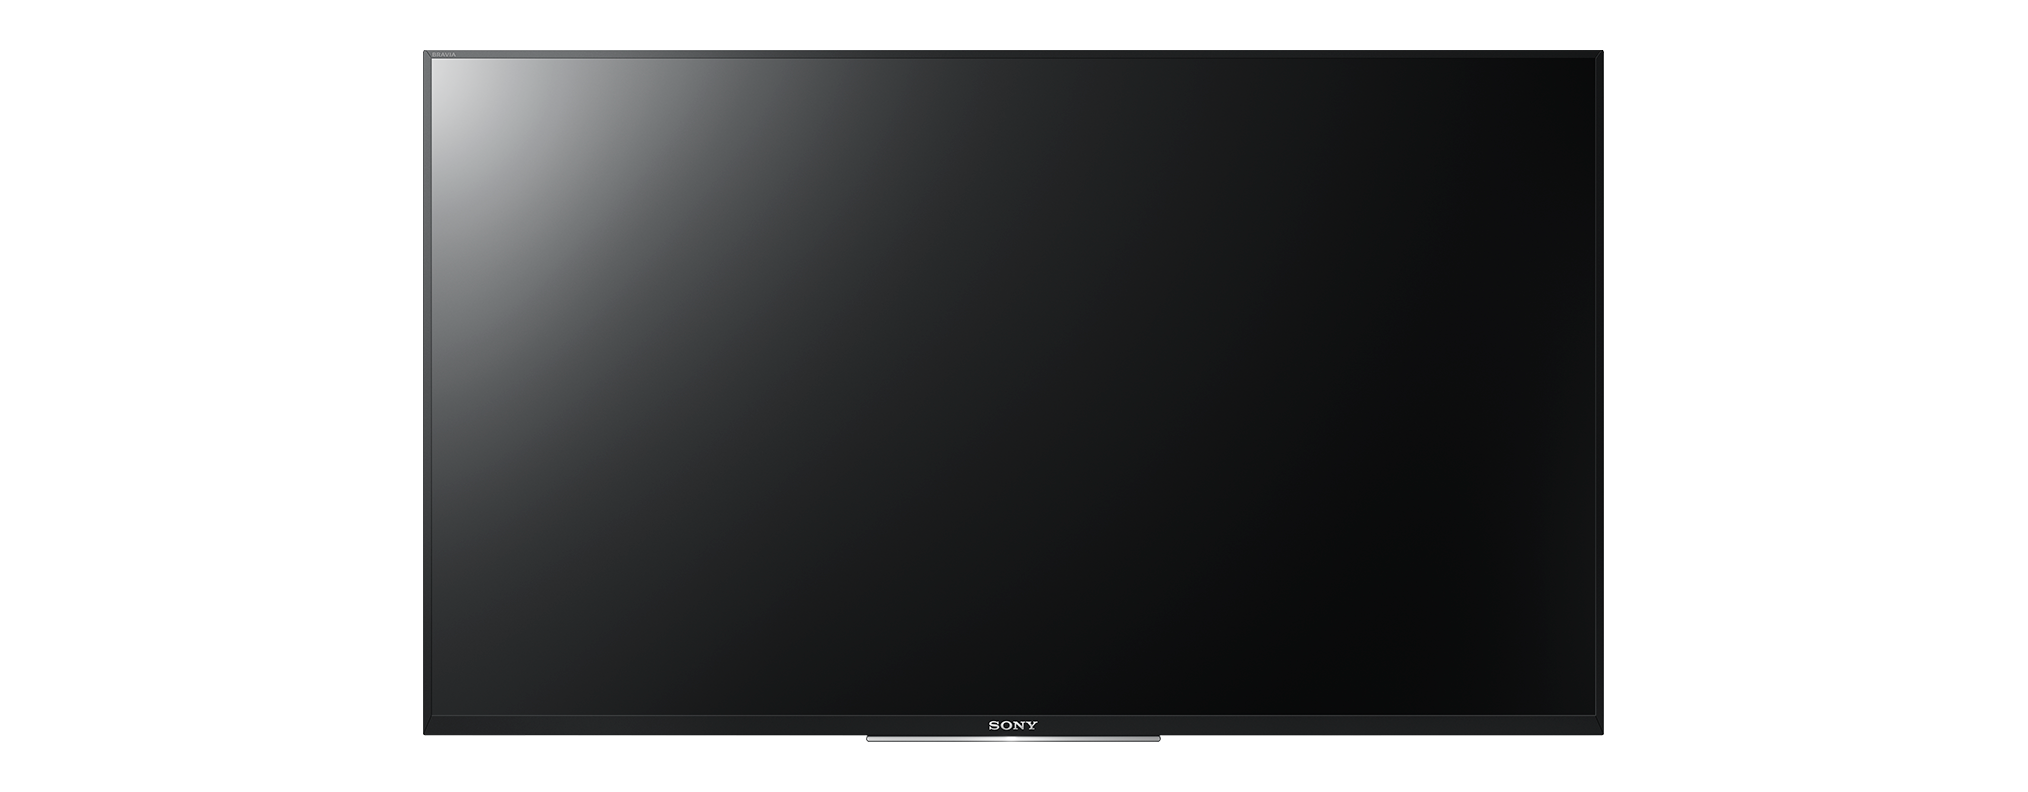 Led Television PNG Image - PurePNG | Free transparent CC0 PNG Image Library